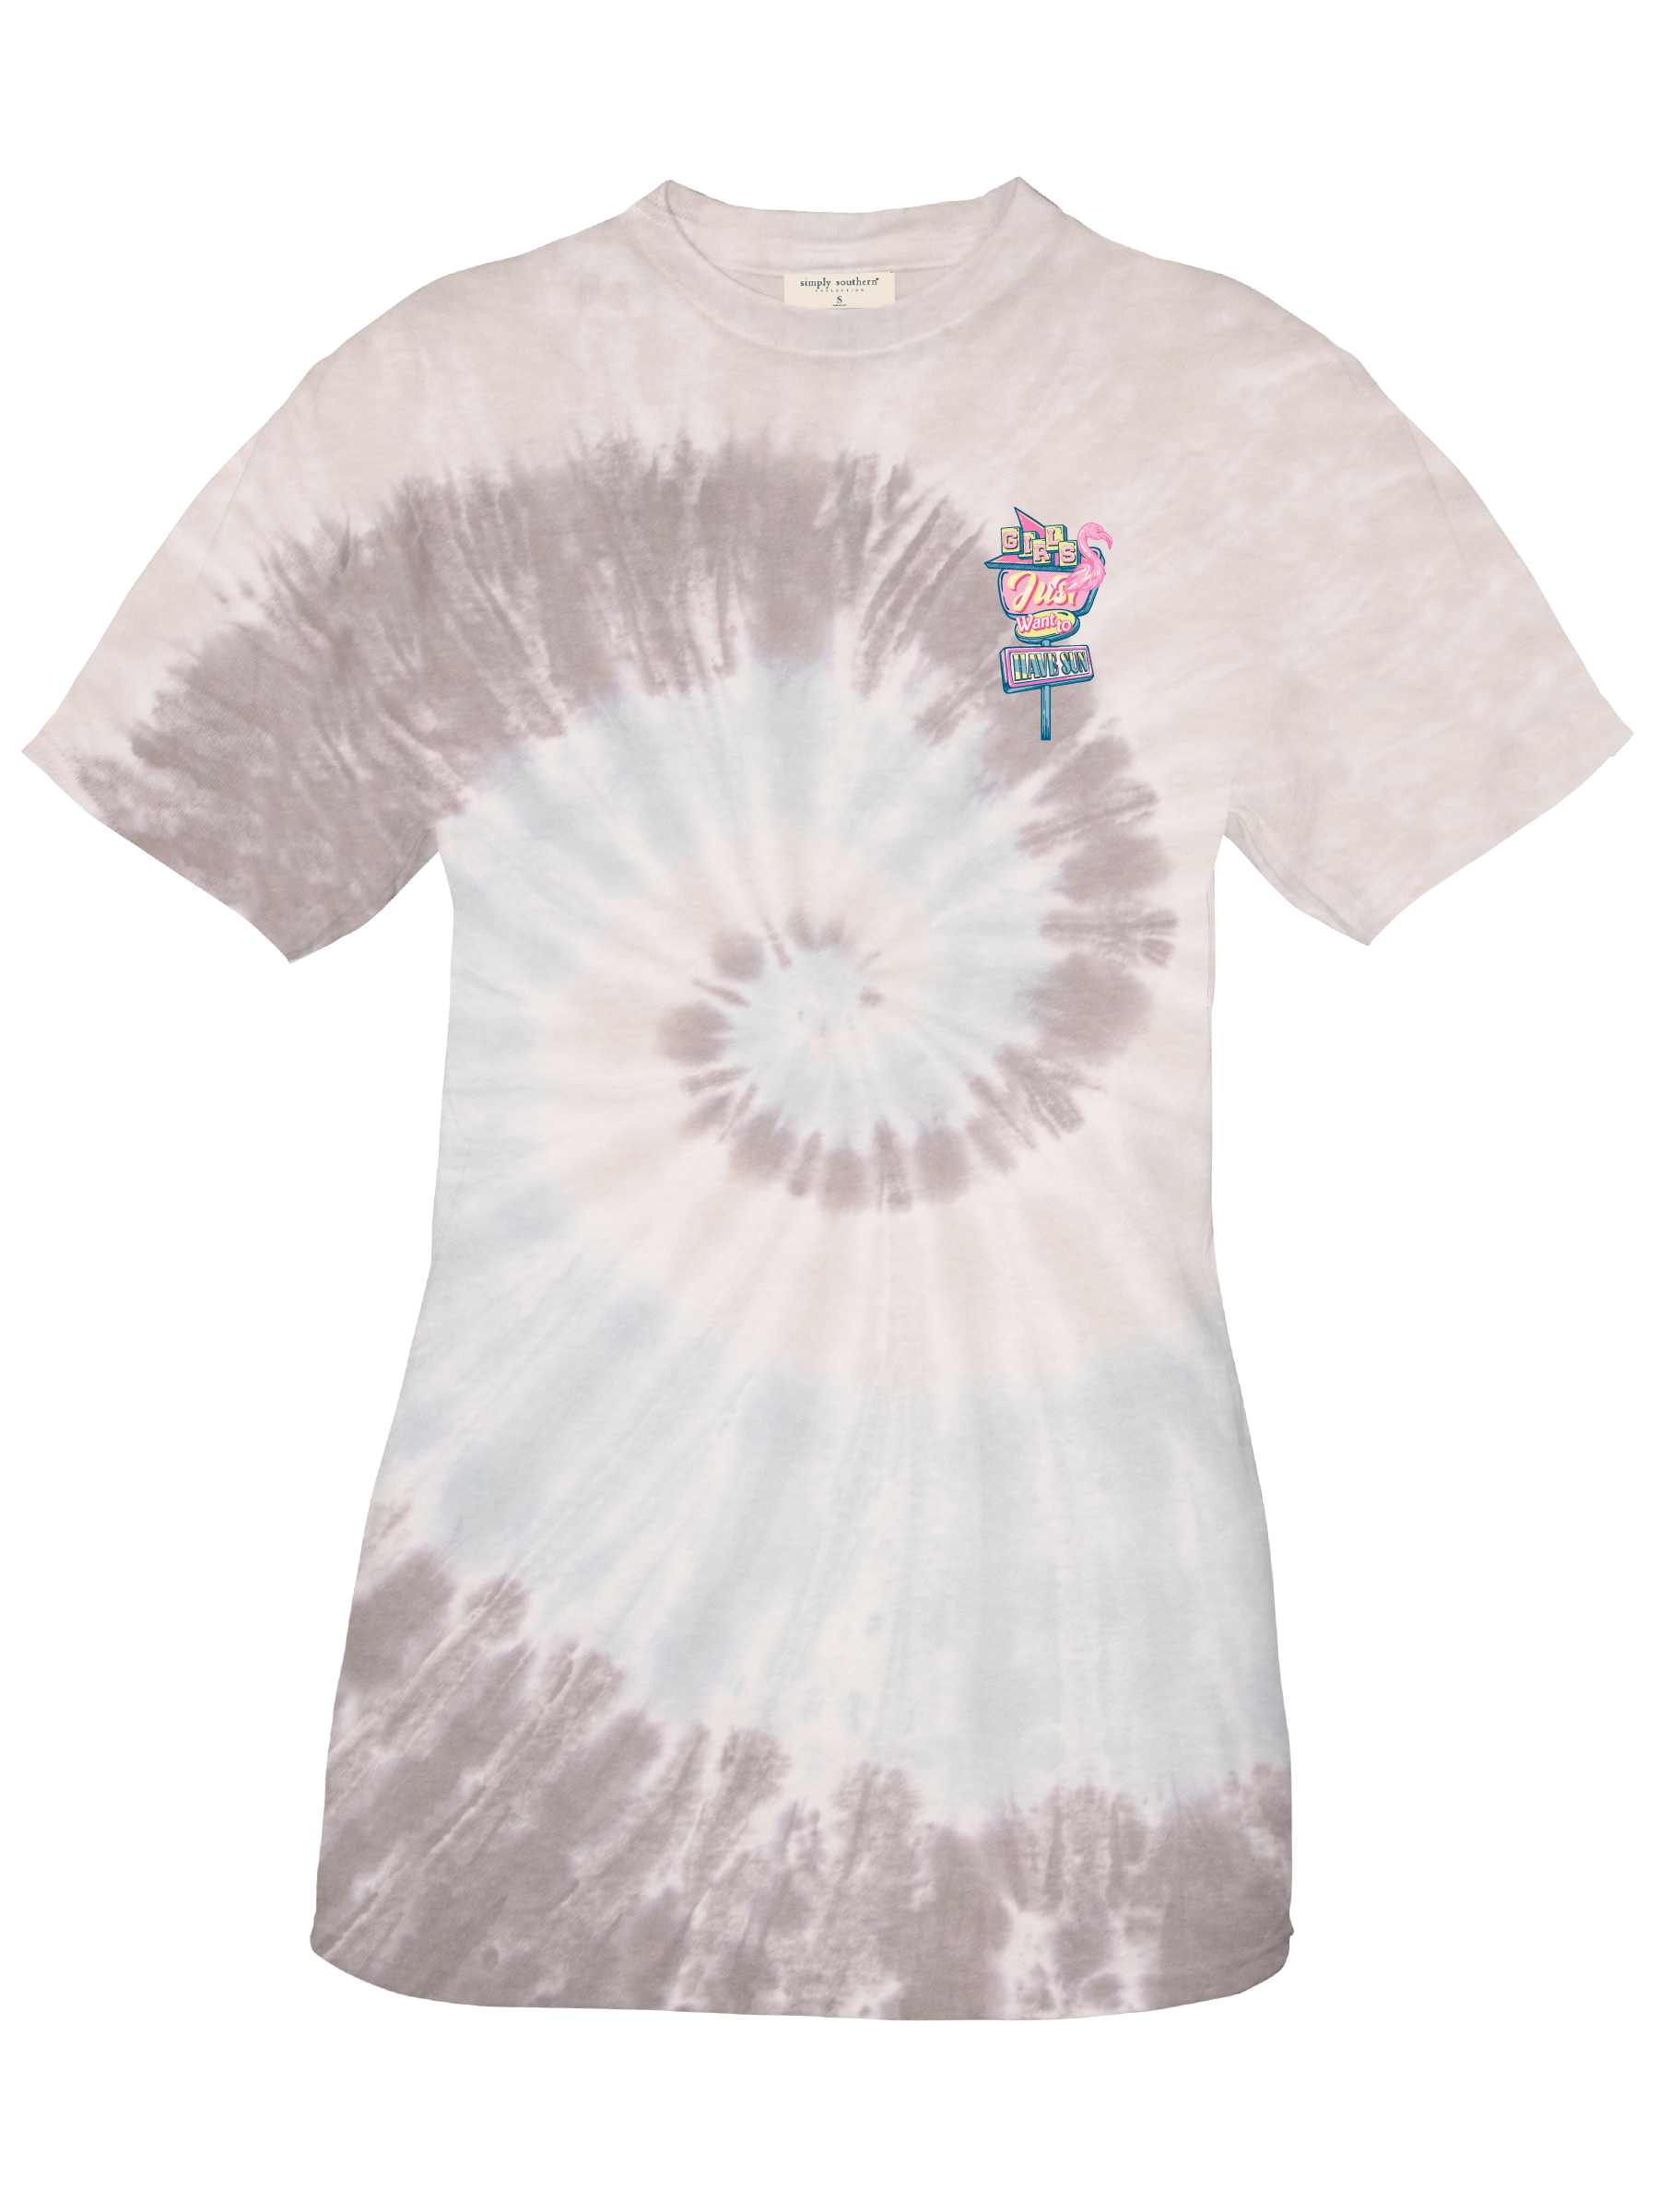 Flamingo Vacation Short Sleeve Tie Dye Tee by Simply Southern